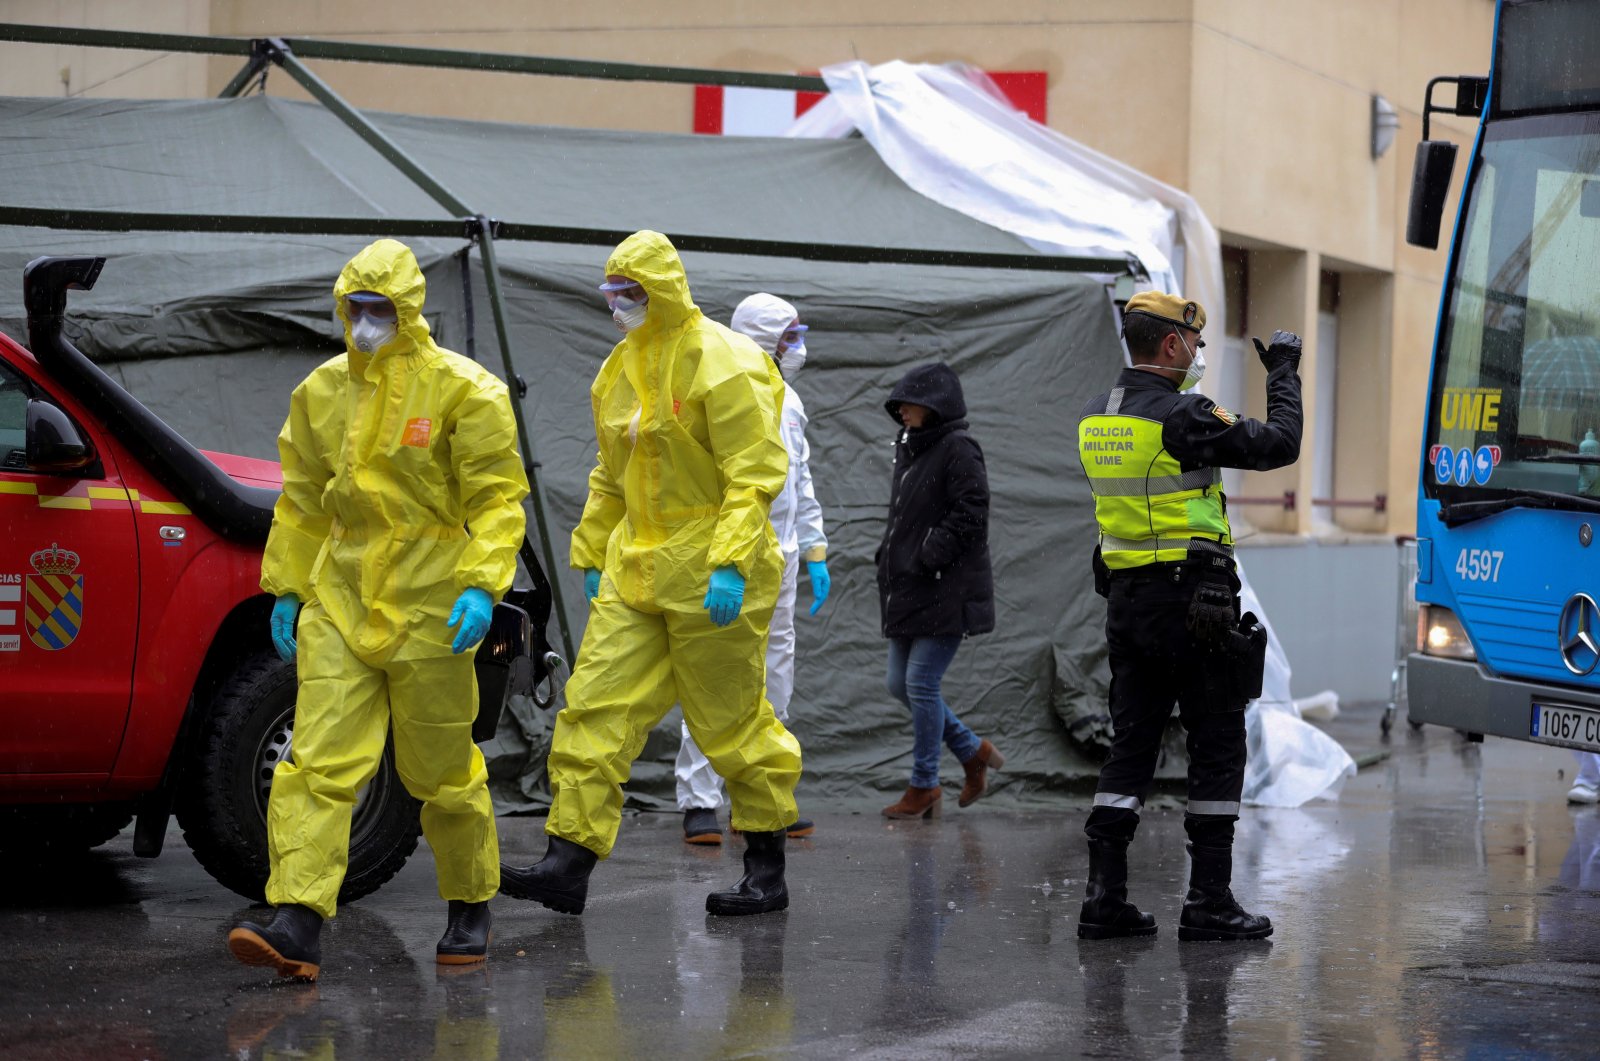 Health workers at a field hospital on the outside of Gregorio Maranon Hospital, during the coronavirus emergencies in Madrid, Spain, Tuesday, March 31, 2020. (EPA Photo)